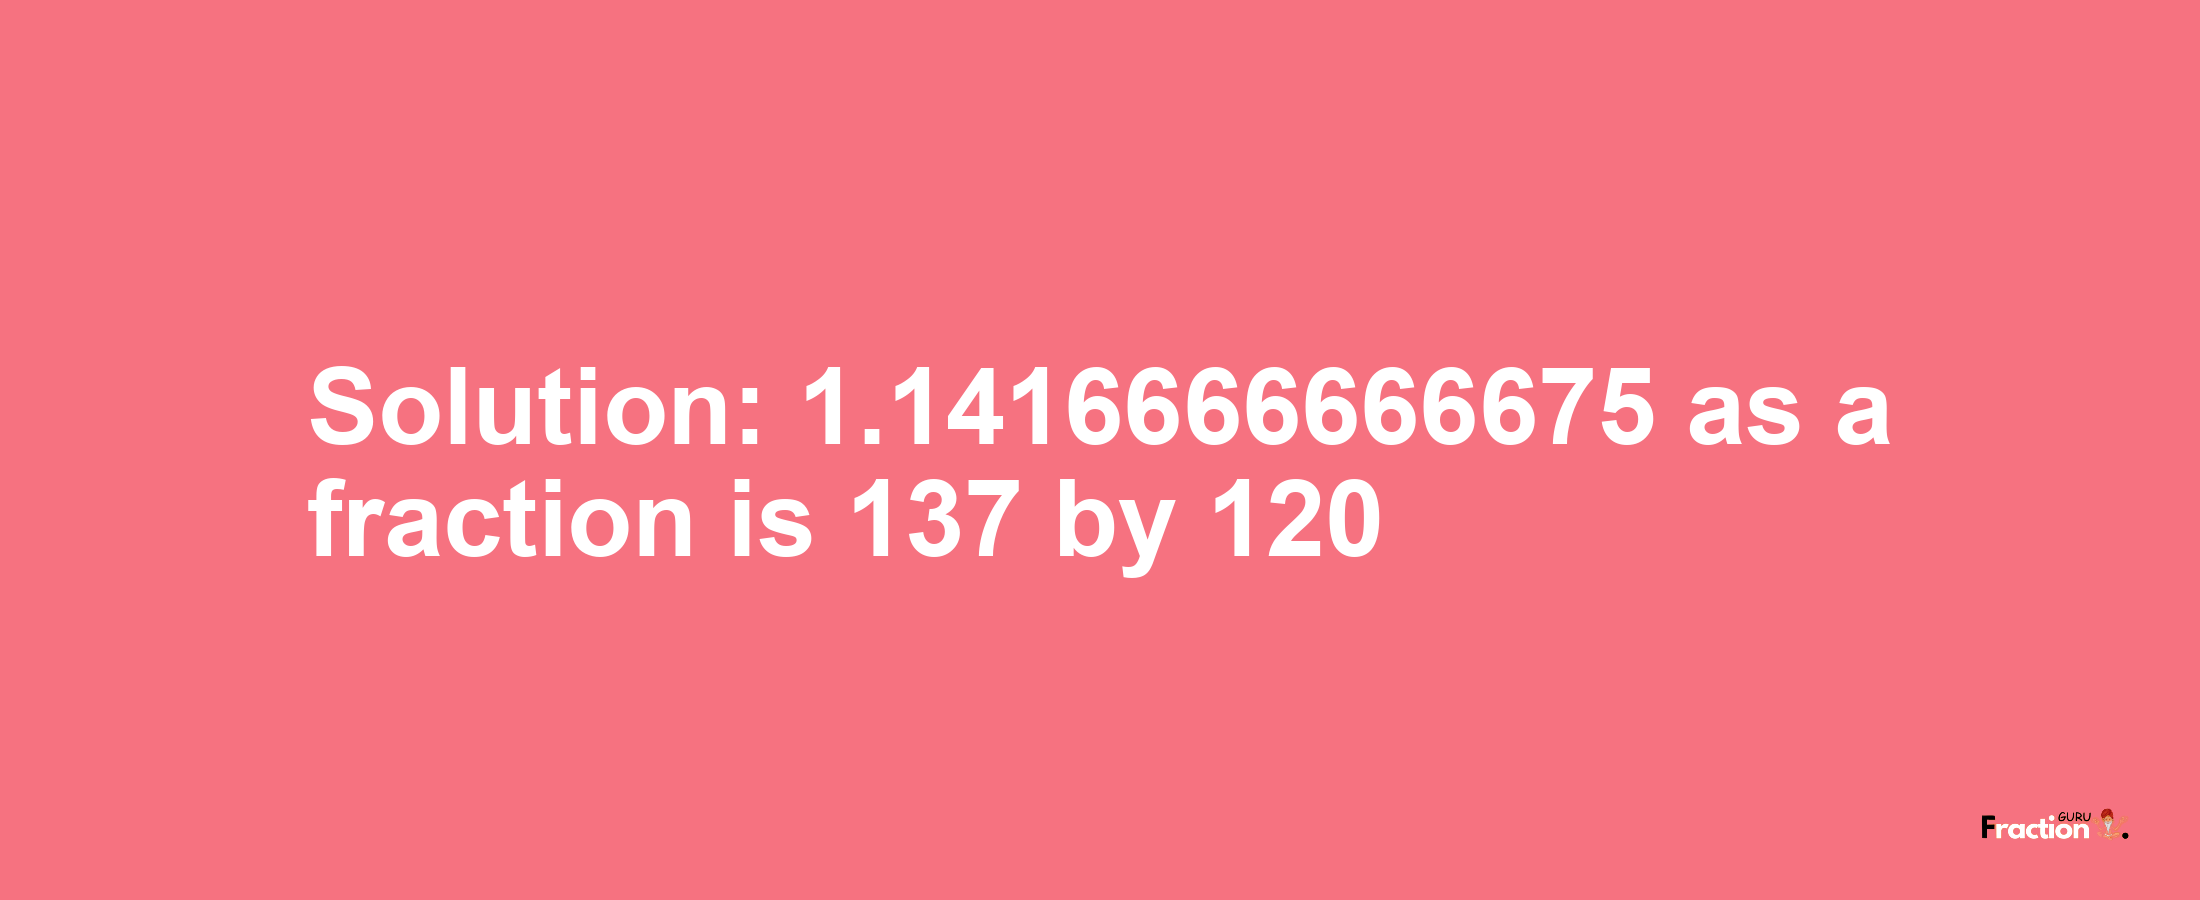 Solution:1.1416666666675 as a fraction is 137/120